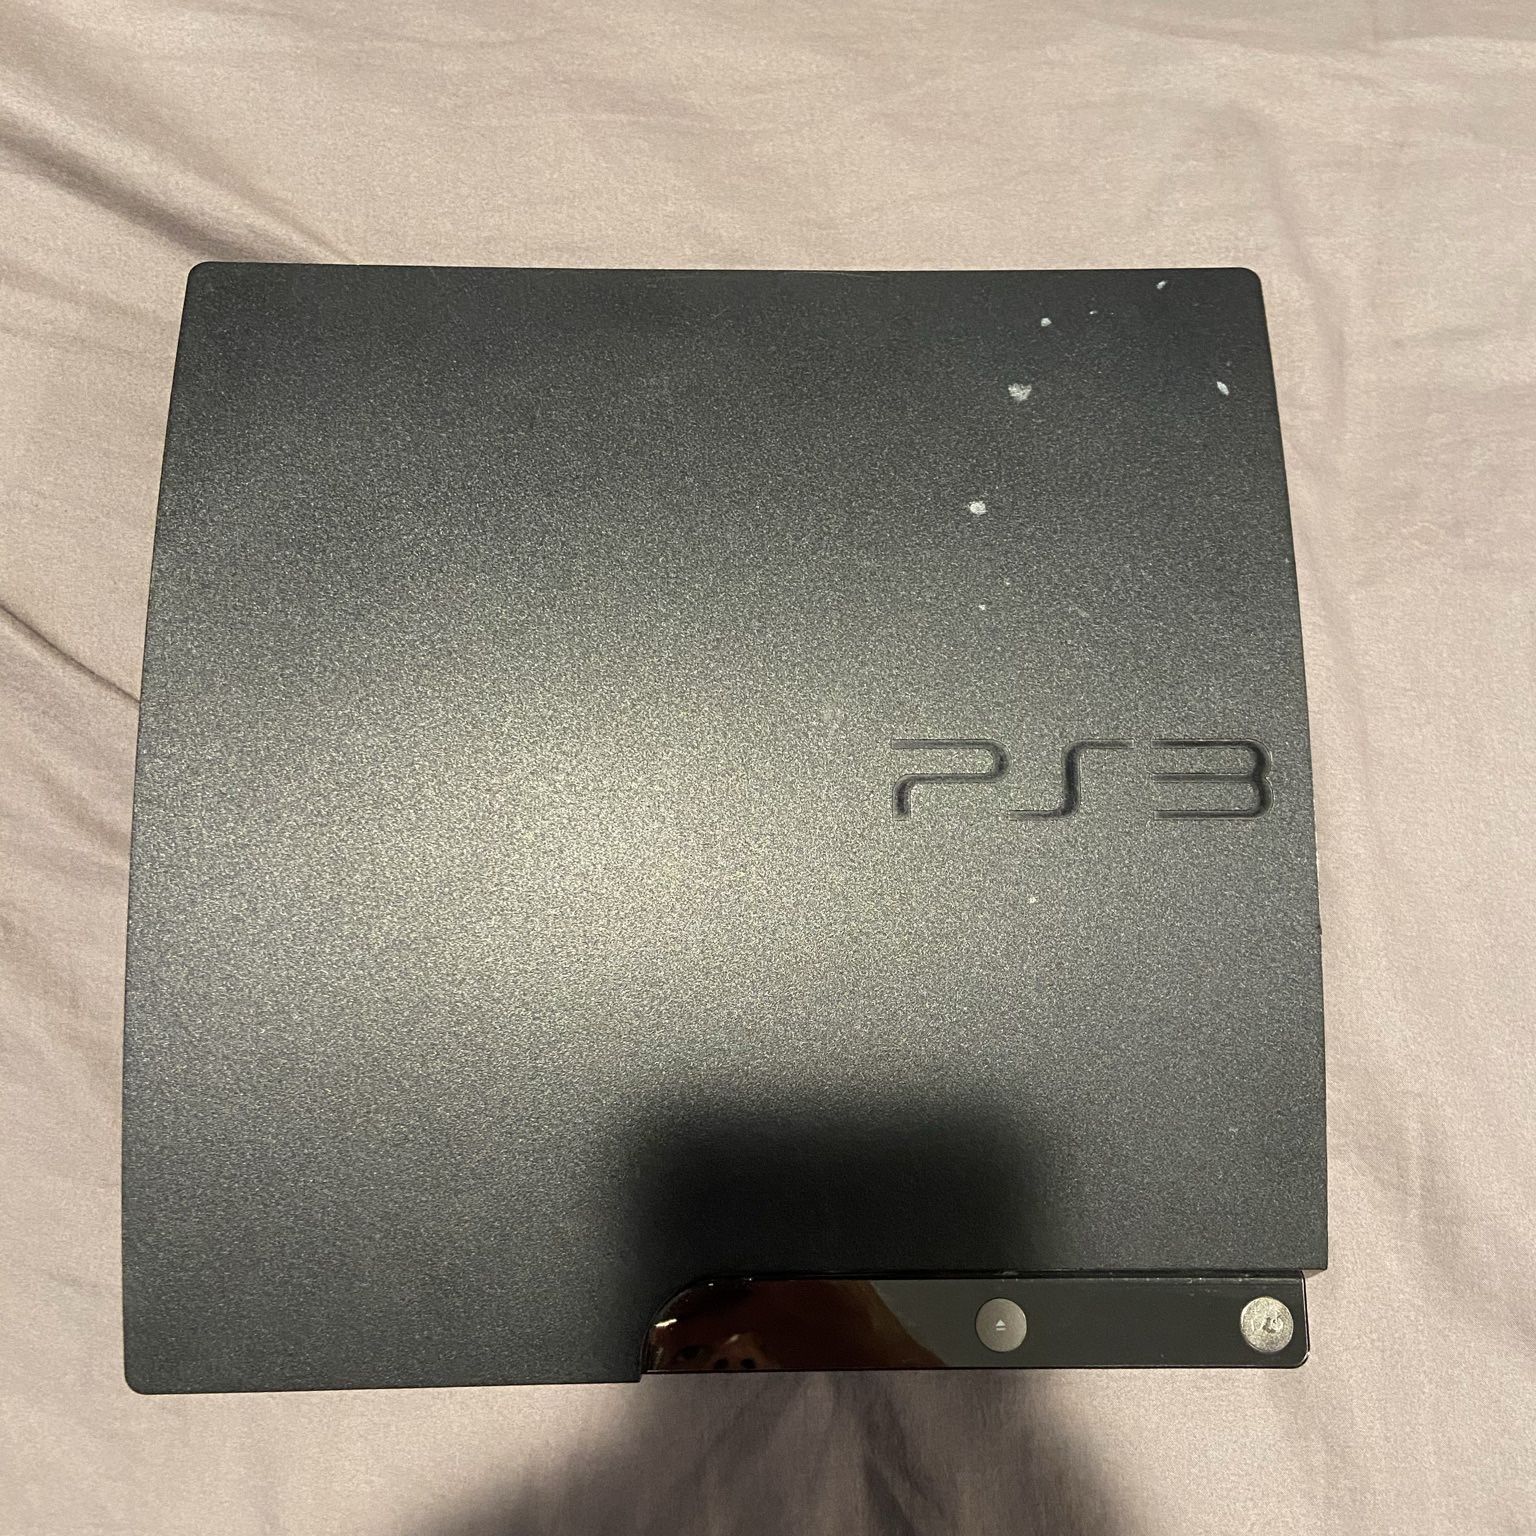 Playstation 3 Killzone 3 for Sale in Brooklyn, NY - OfferUp